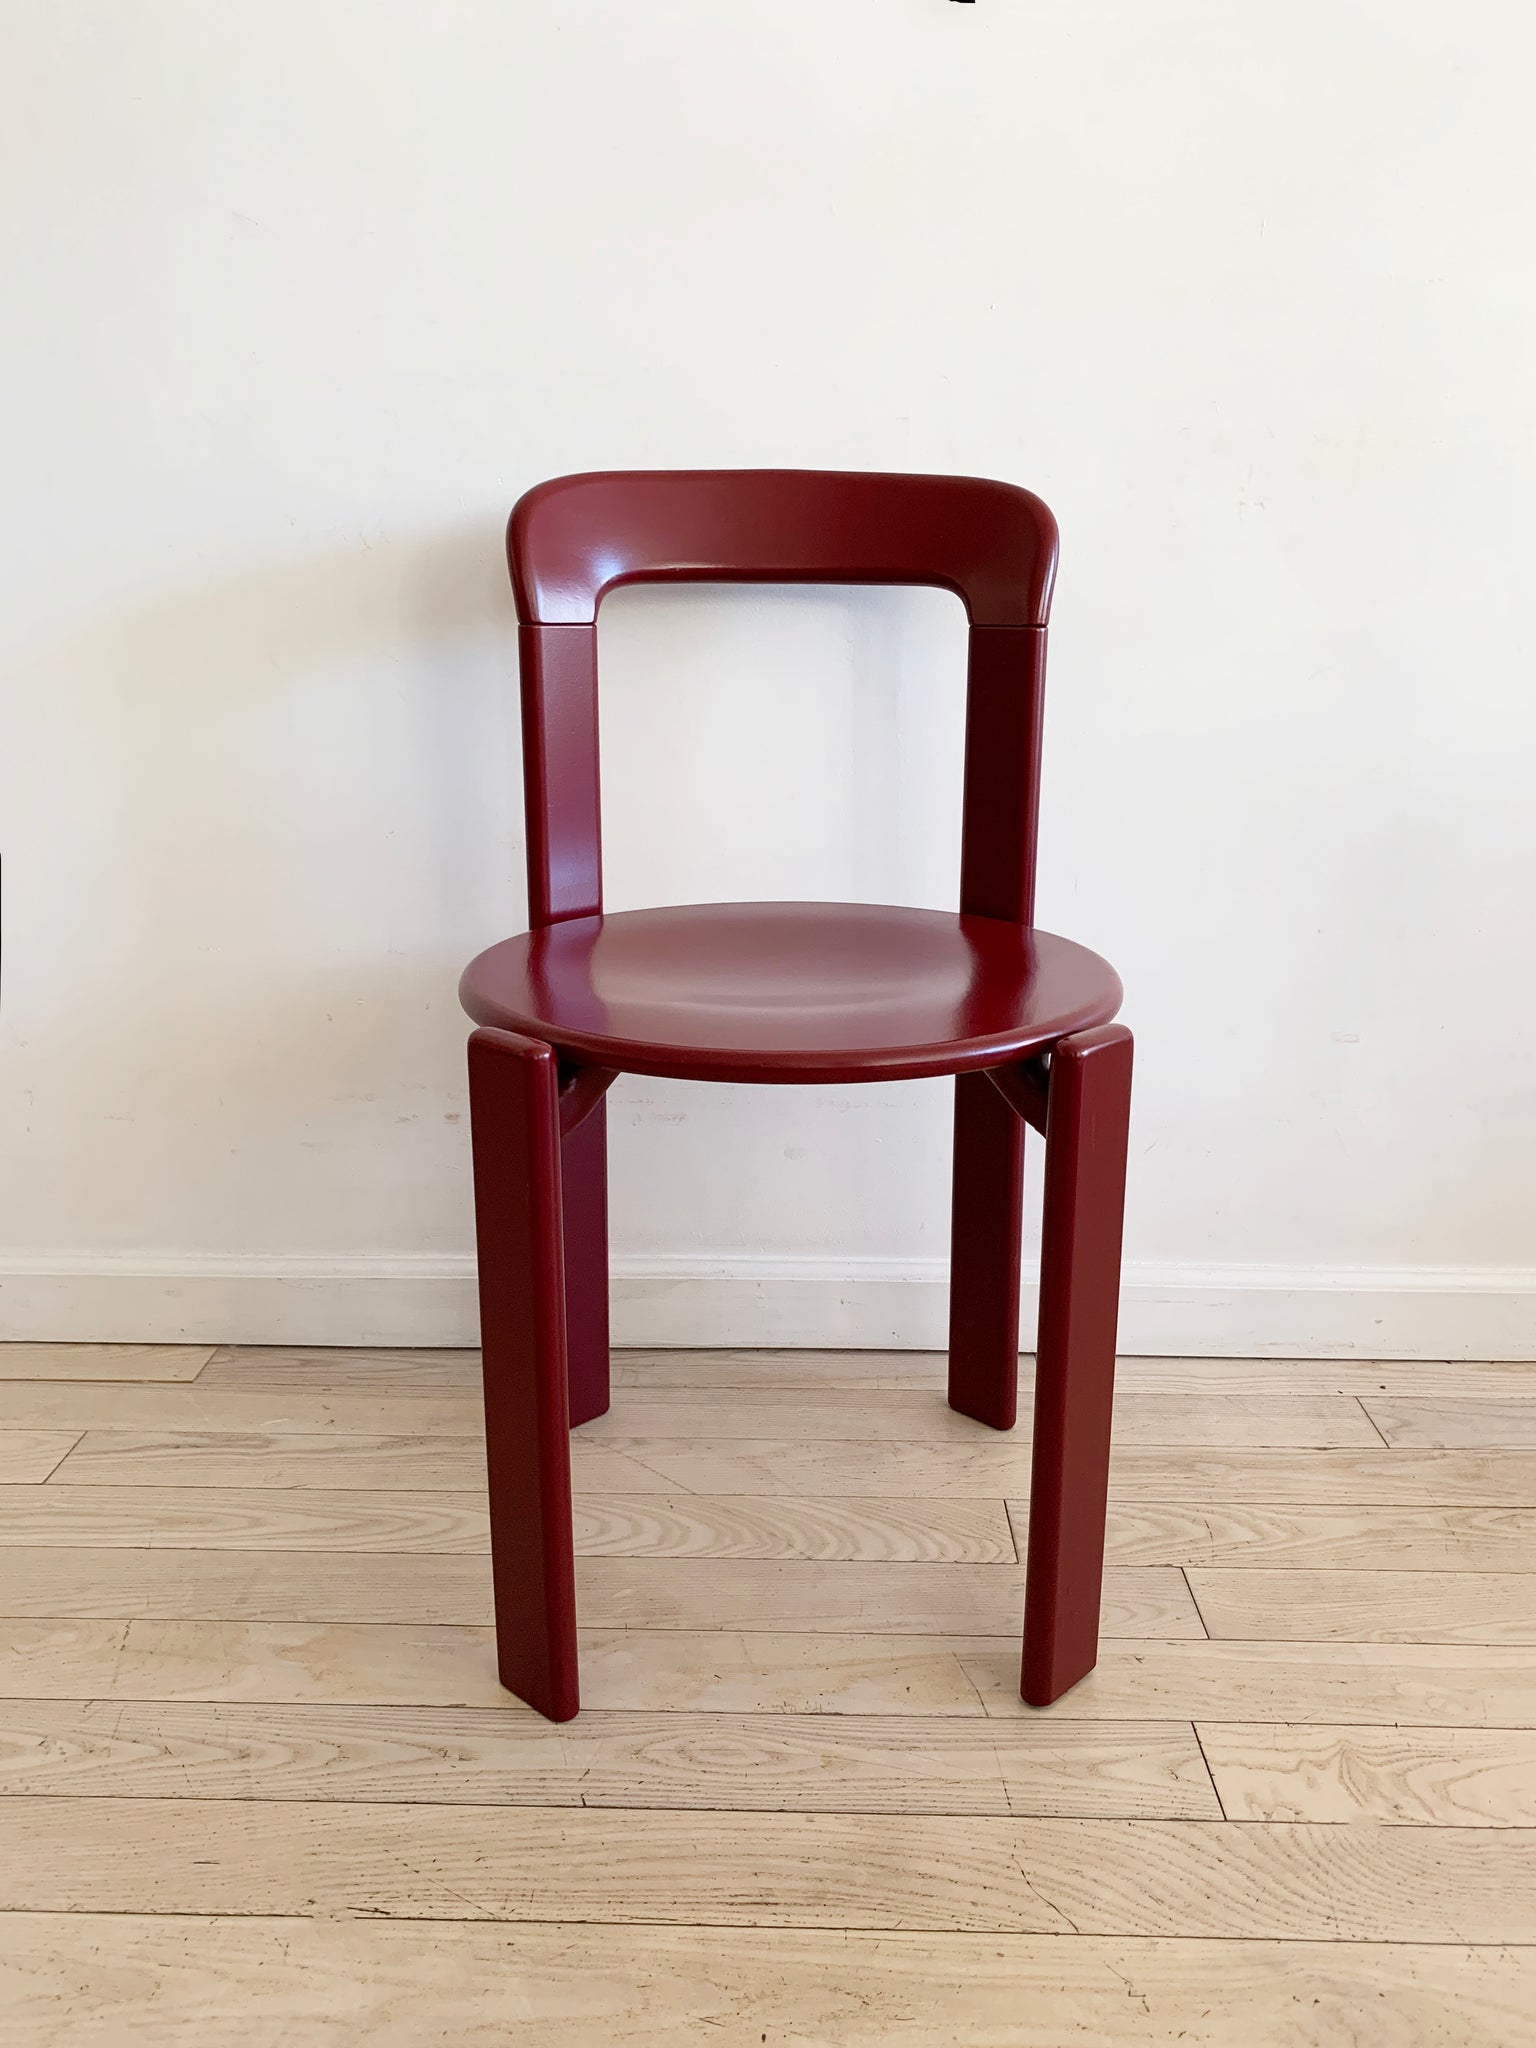 1970s Rey Stacking Chairs in Raspberry Red by Bruno Rey